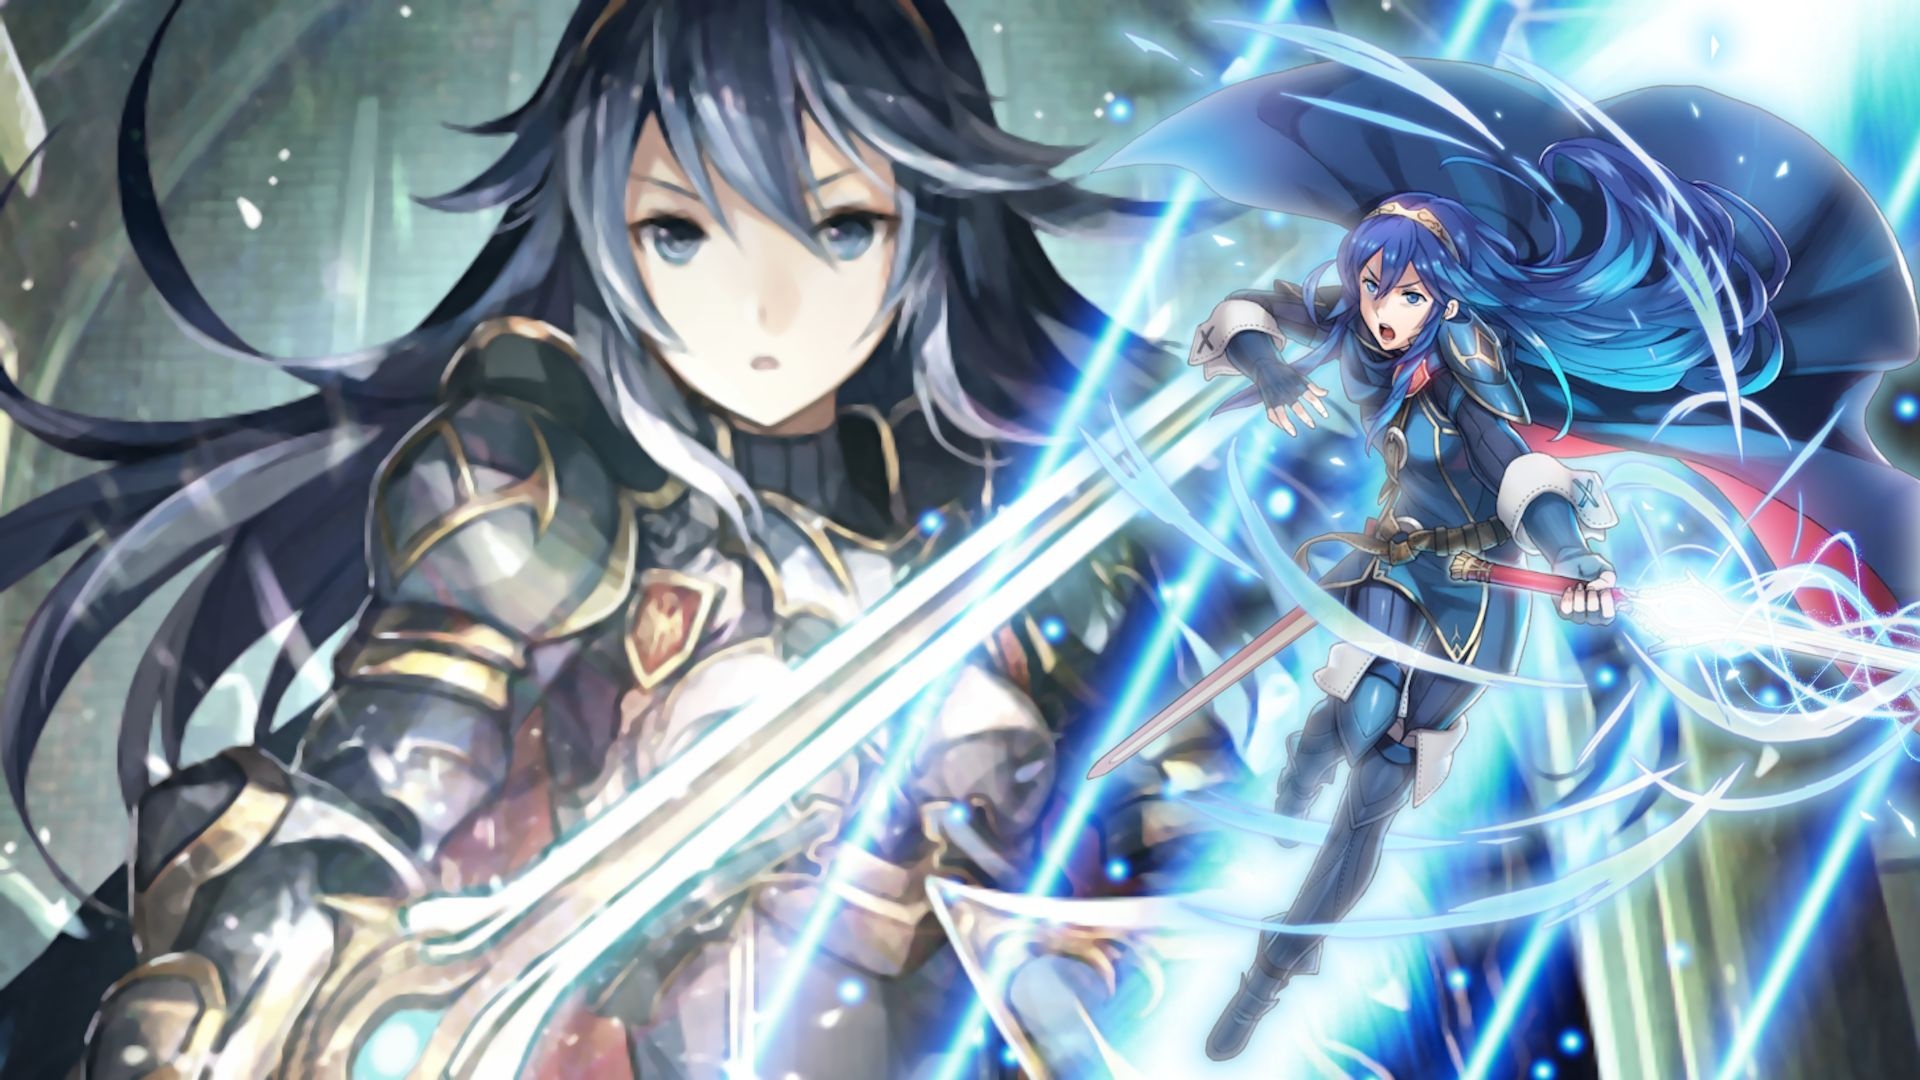 Lucina wallpaper, Captivating design, Posted by Christopher Johnson, Emblem's iconic character, 1920x1080 Full HD Desktop